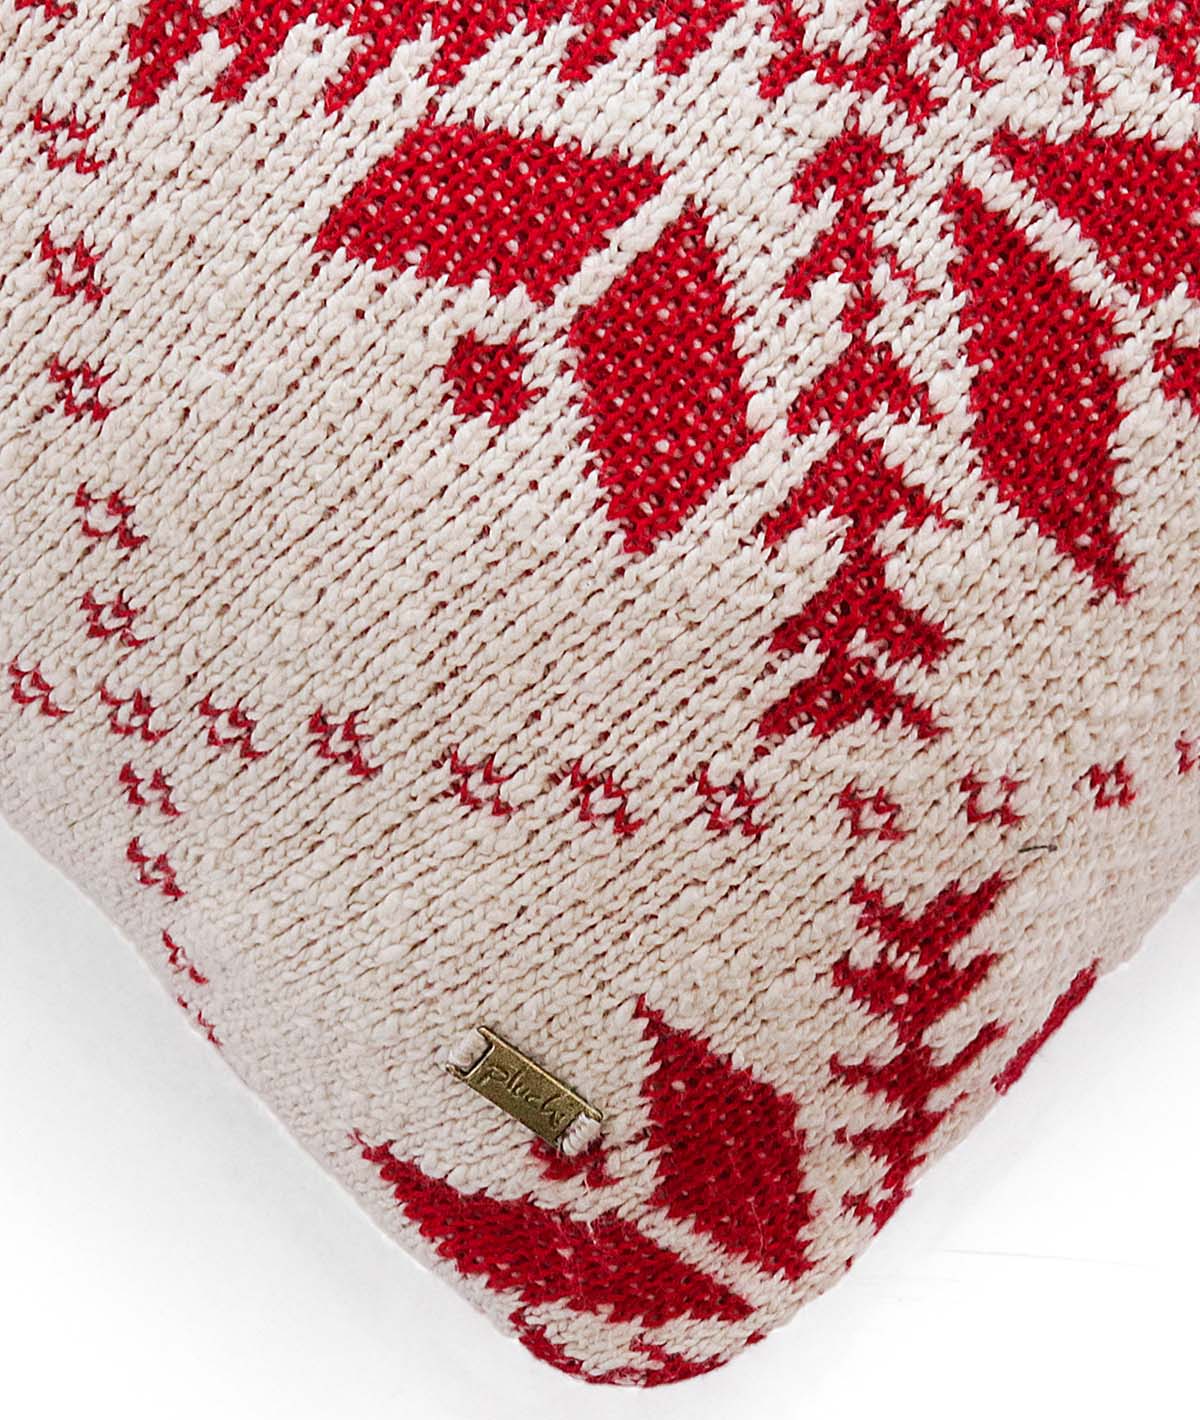 Snowflakes Cotton Knitted Decorative Natural & Red Color 16 x 24 Inches Pillow Covers